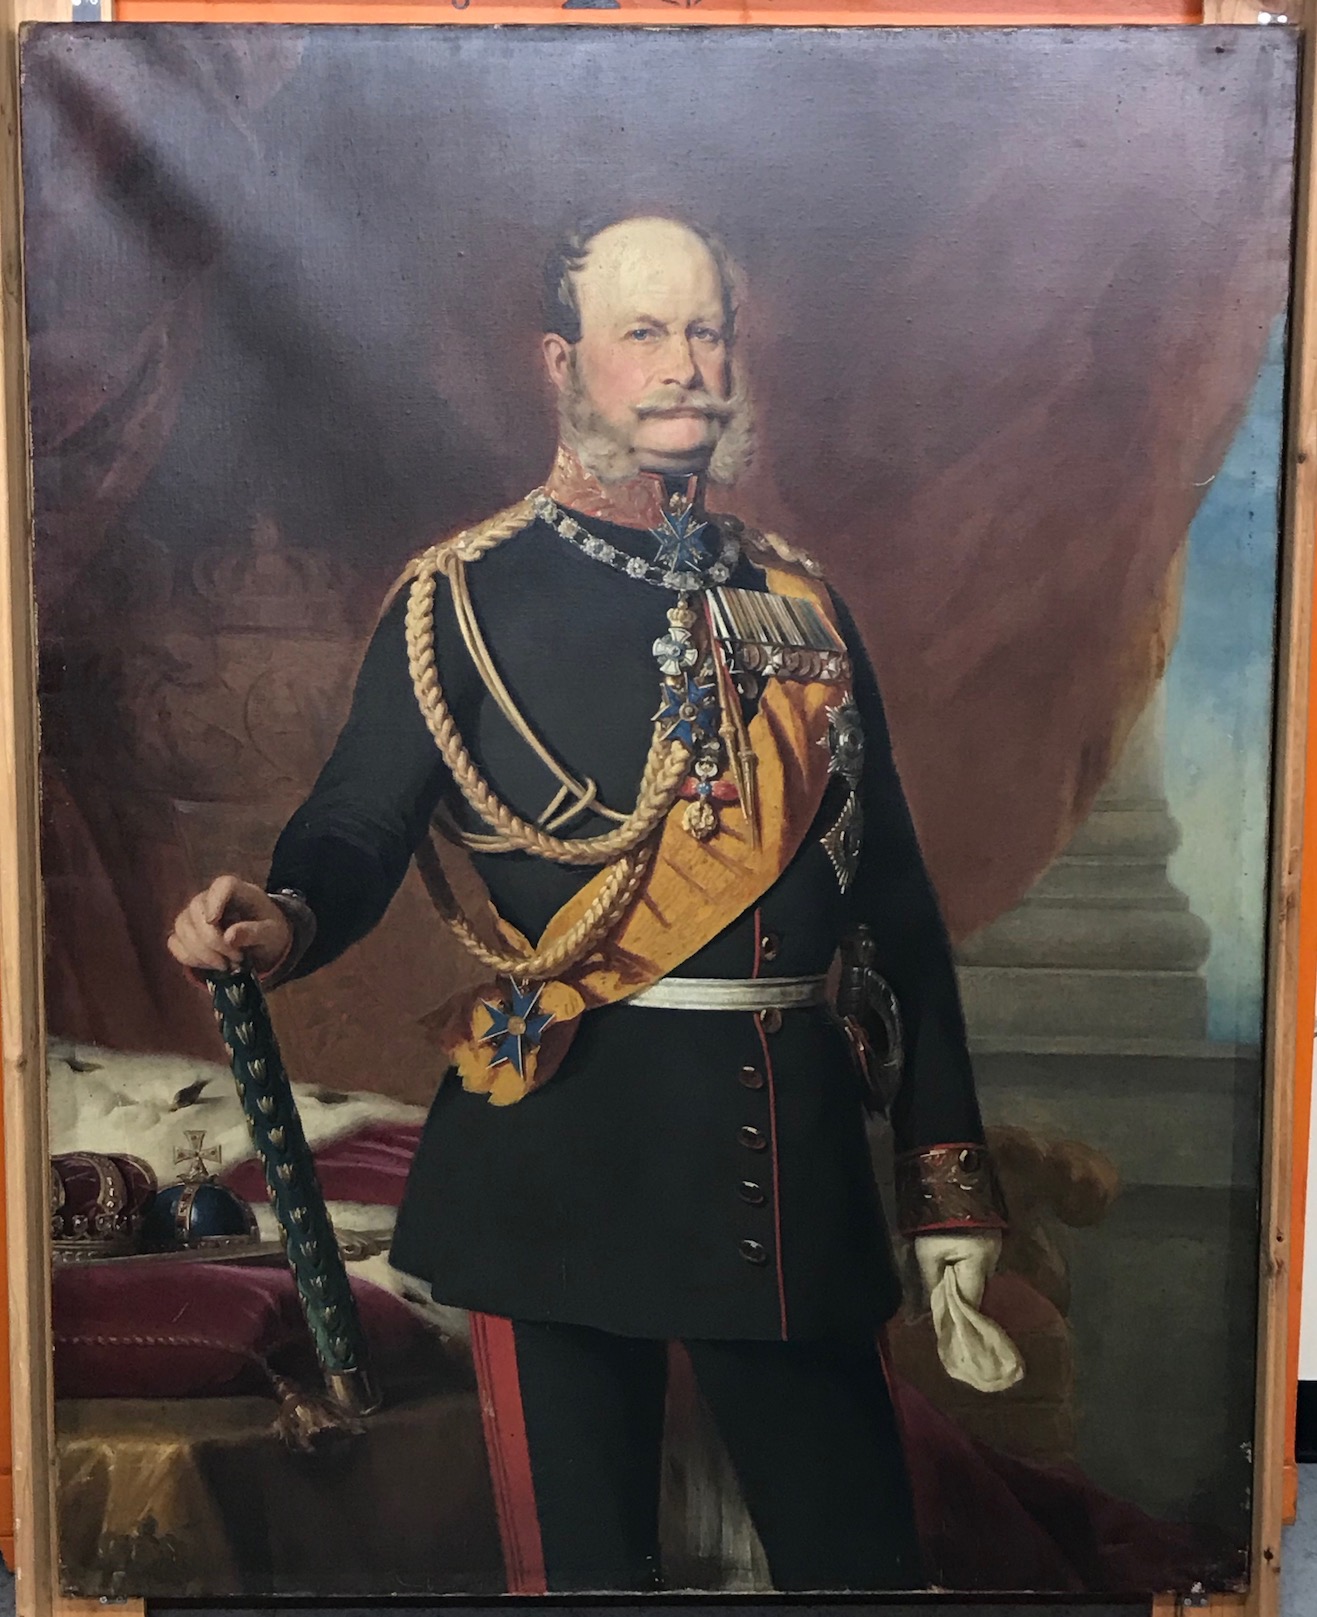 Albums 90+ Images the first emperor of a united germany was: Full HD, 2k, 4k